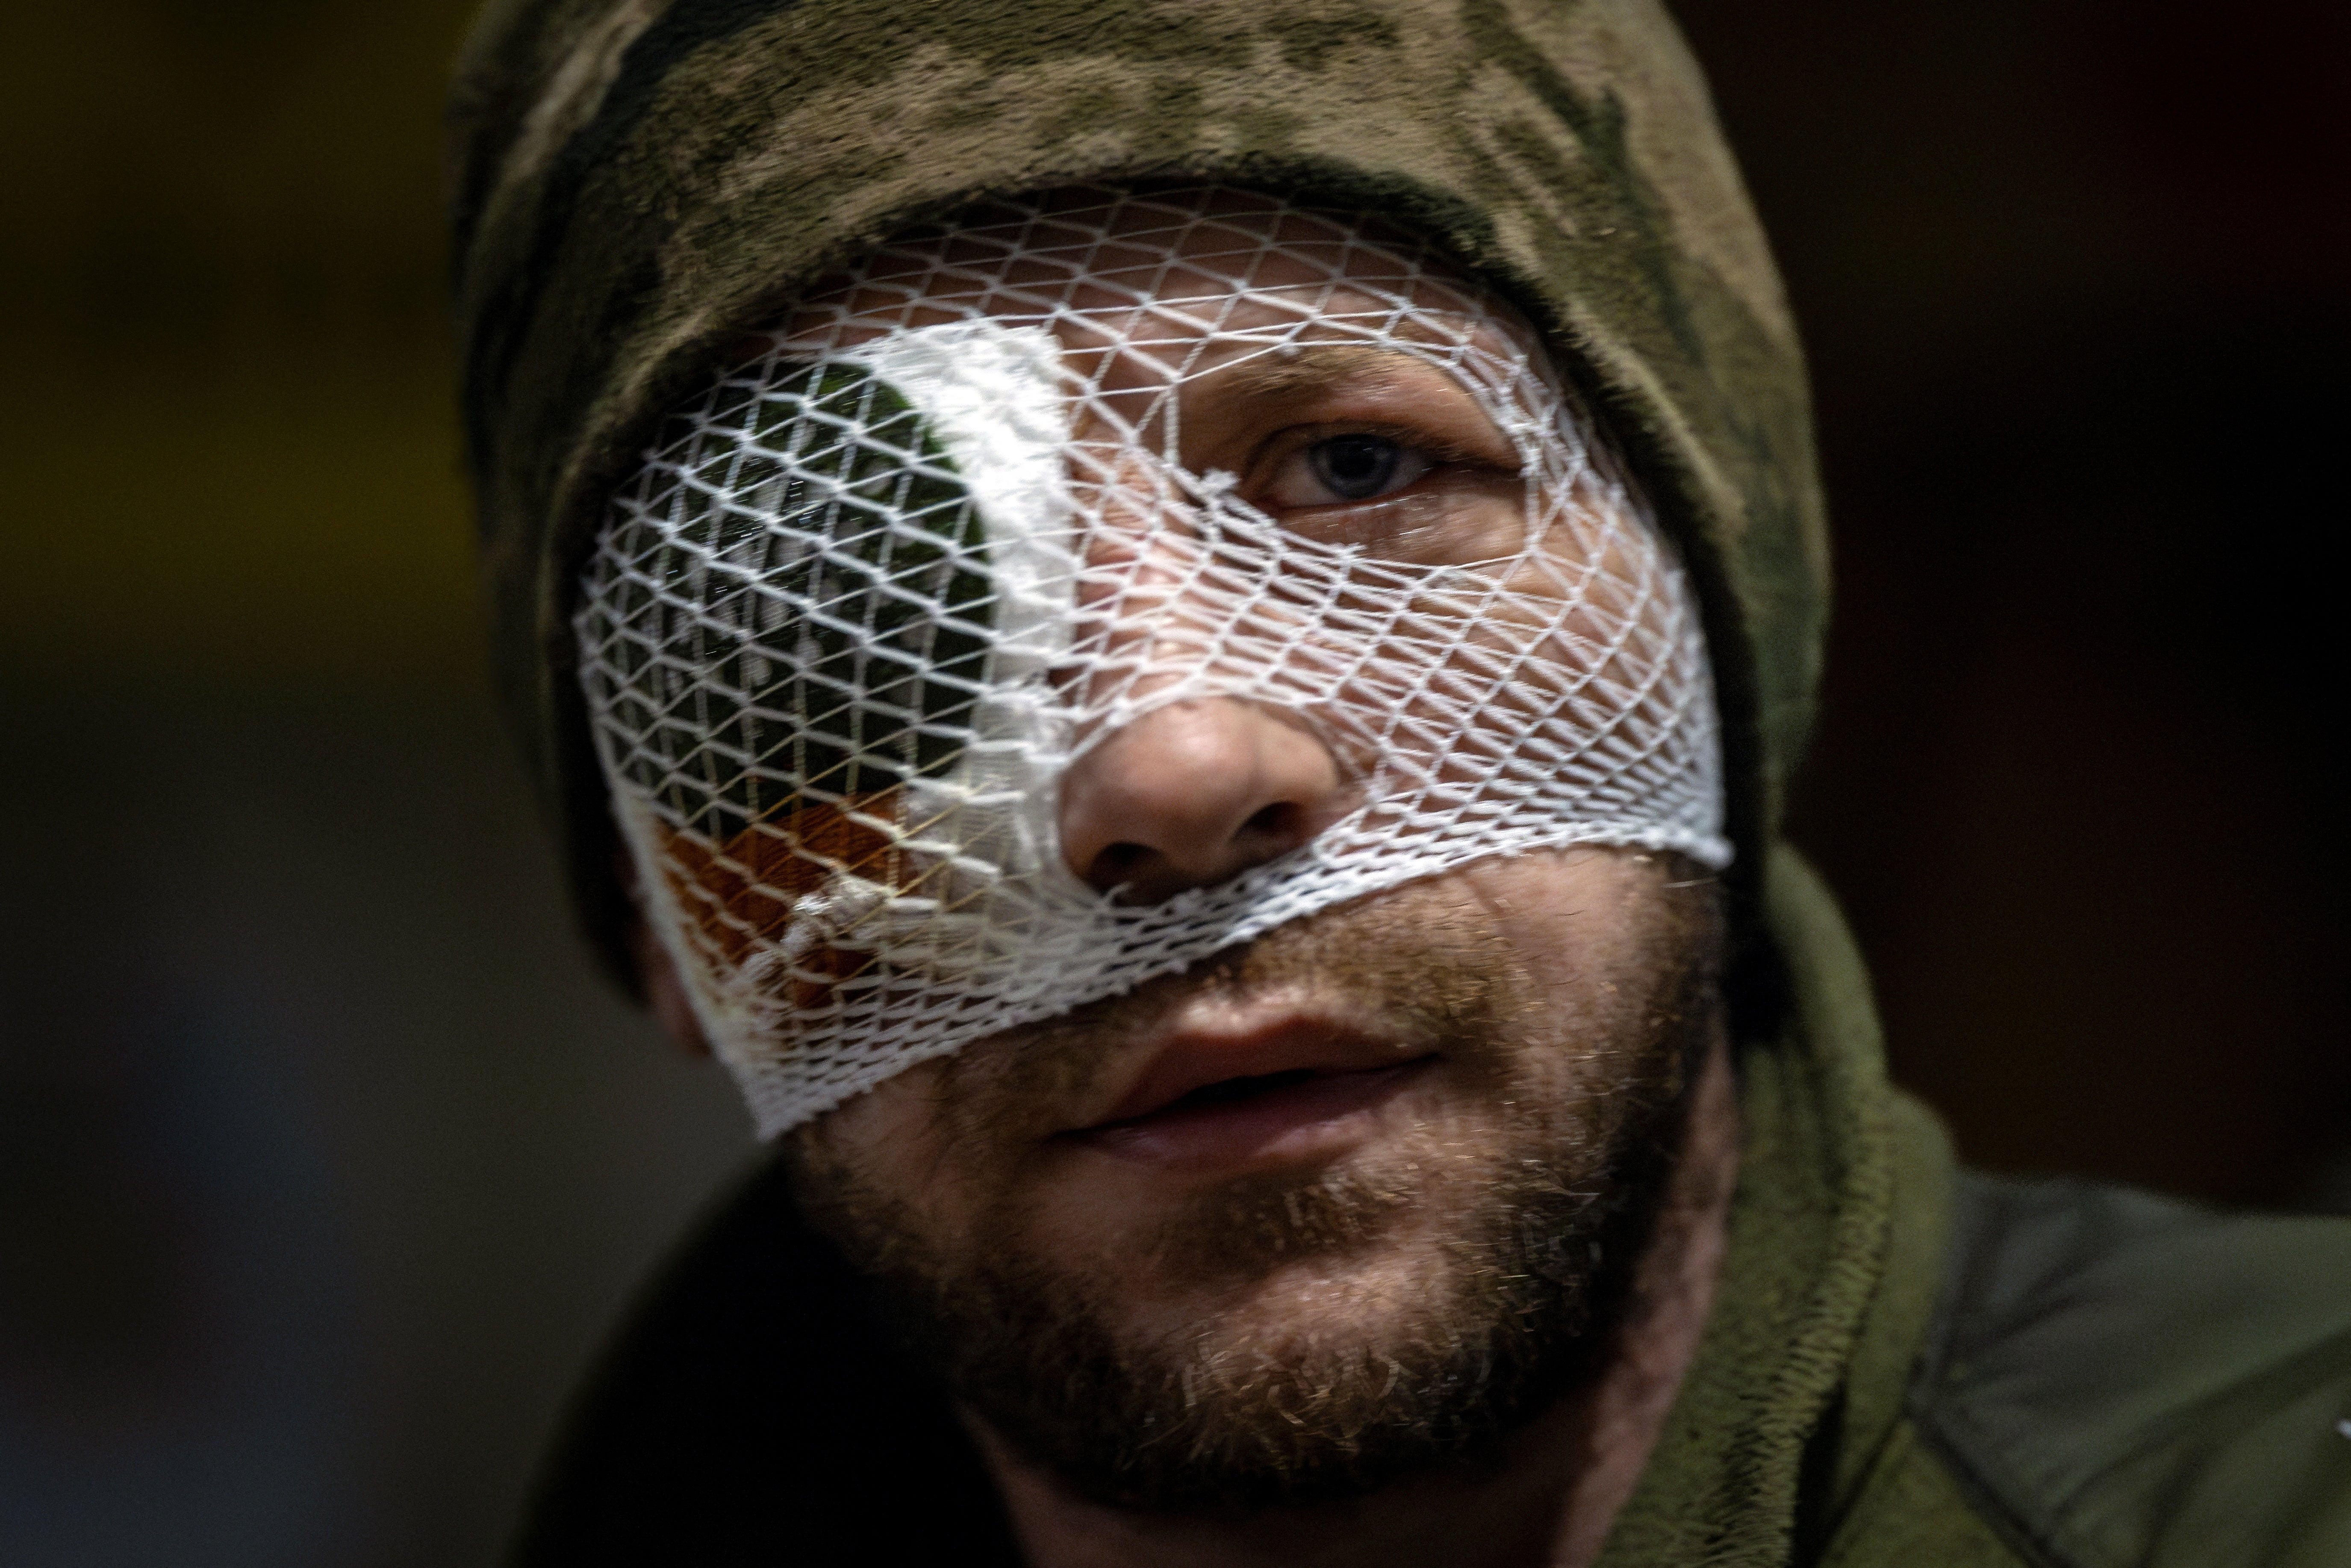 An injured soldier looks on in a medical stabilisation point near the frontlines in the Donetsk region